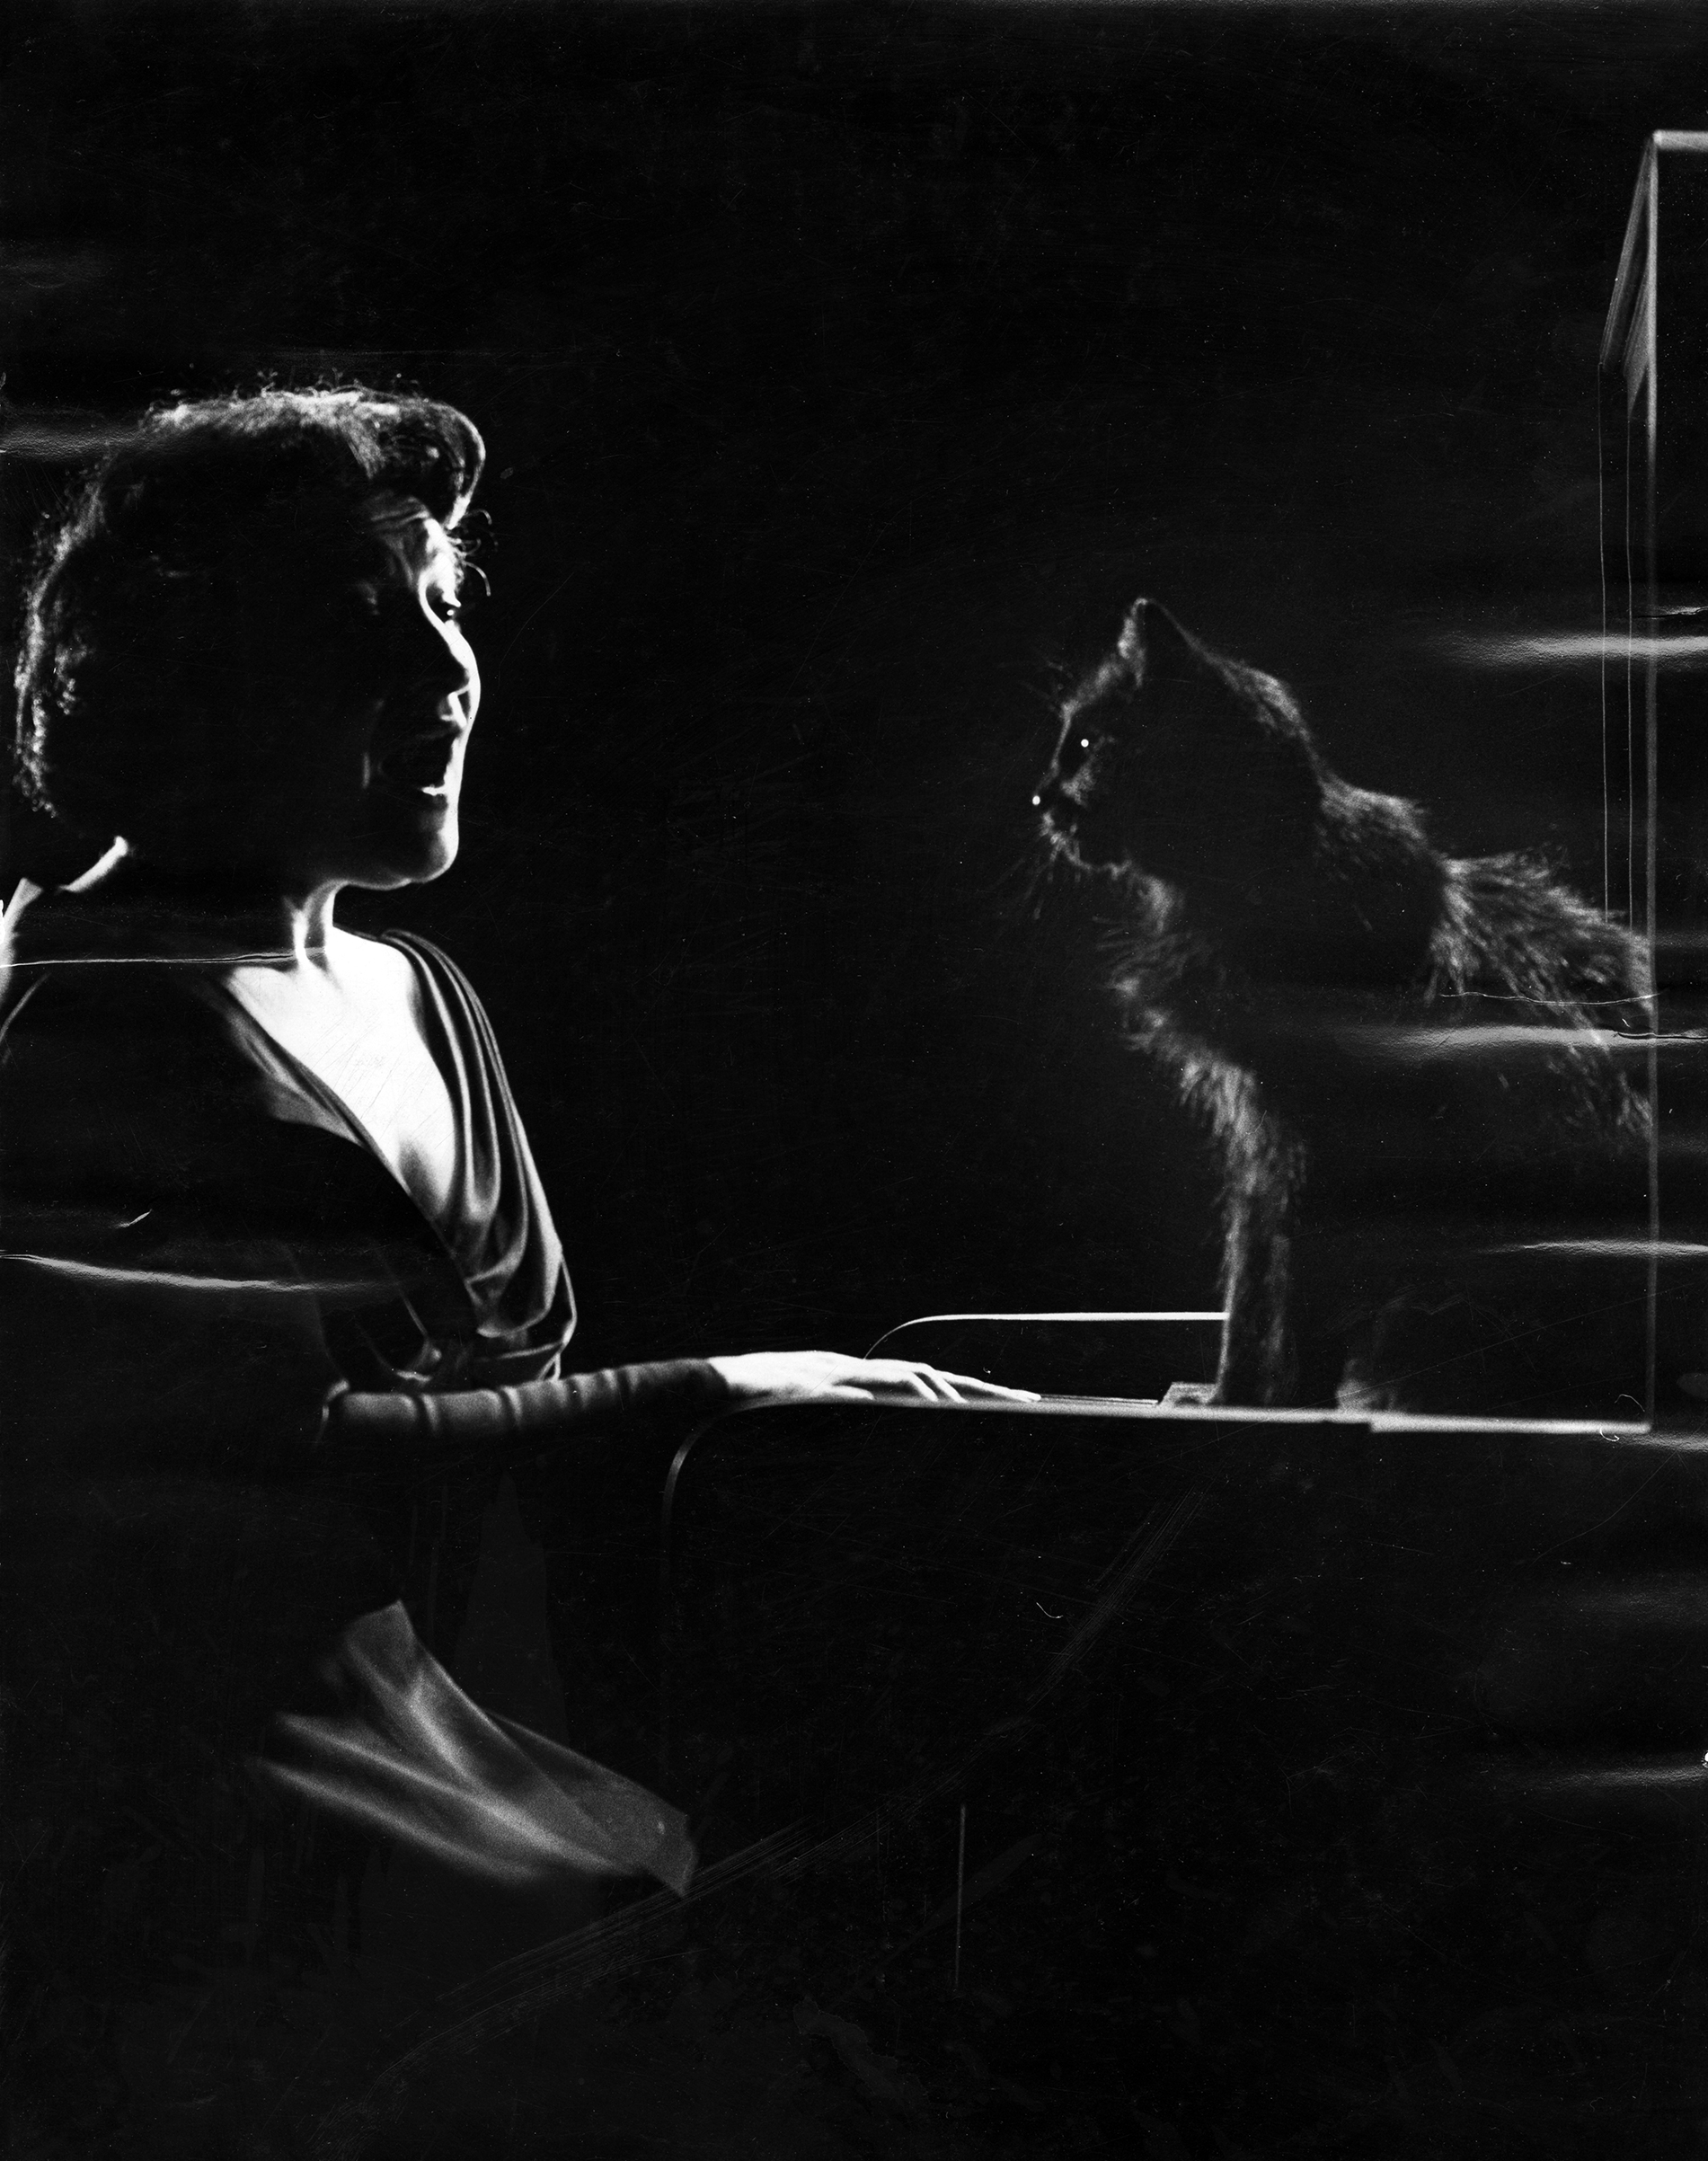 Russian-born American operatic mezzo-soprano Jennie Tourel sings as a cat named Blackie sits on a piano, 1952.